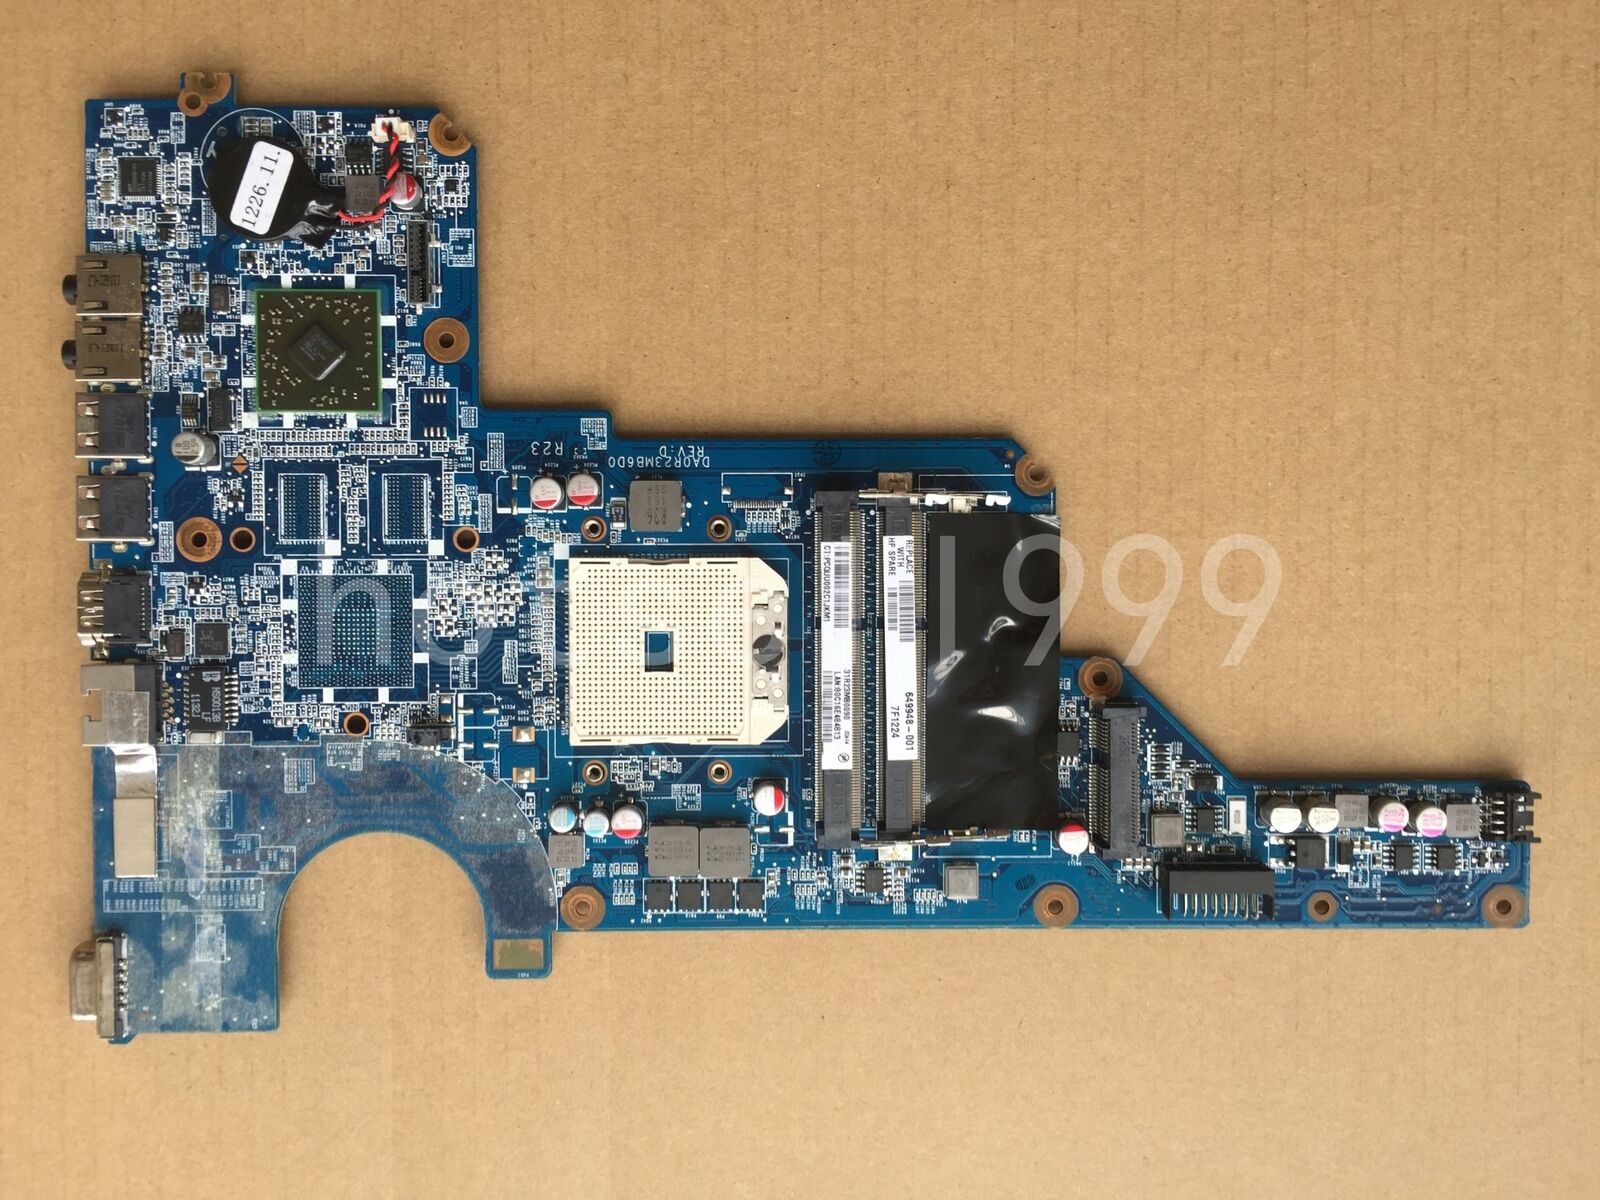 For HP Pavilion G4 G6 G7 AMD S1 Laptop Motherboard,649948-001 TEST Ok Brand: HP Number of Memory Slots: 2 - Click Image to Close